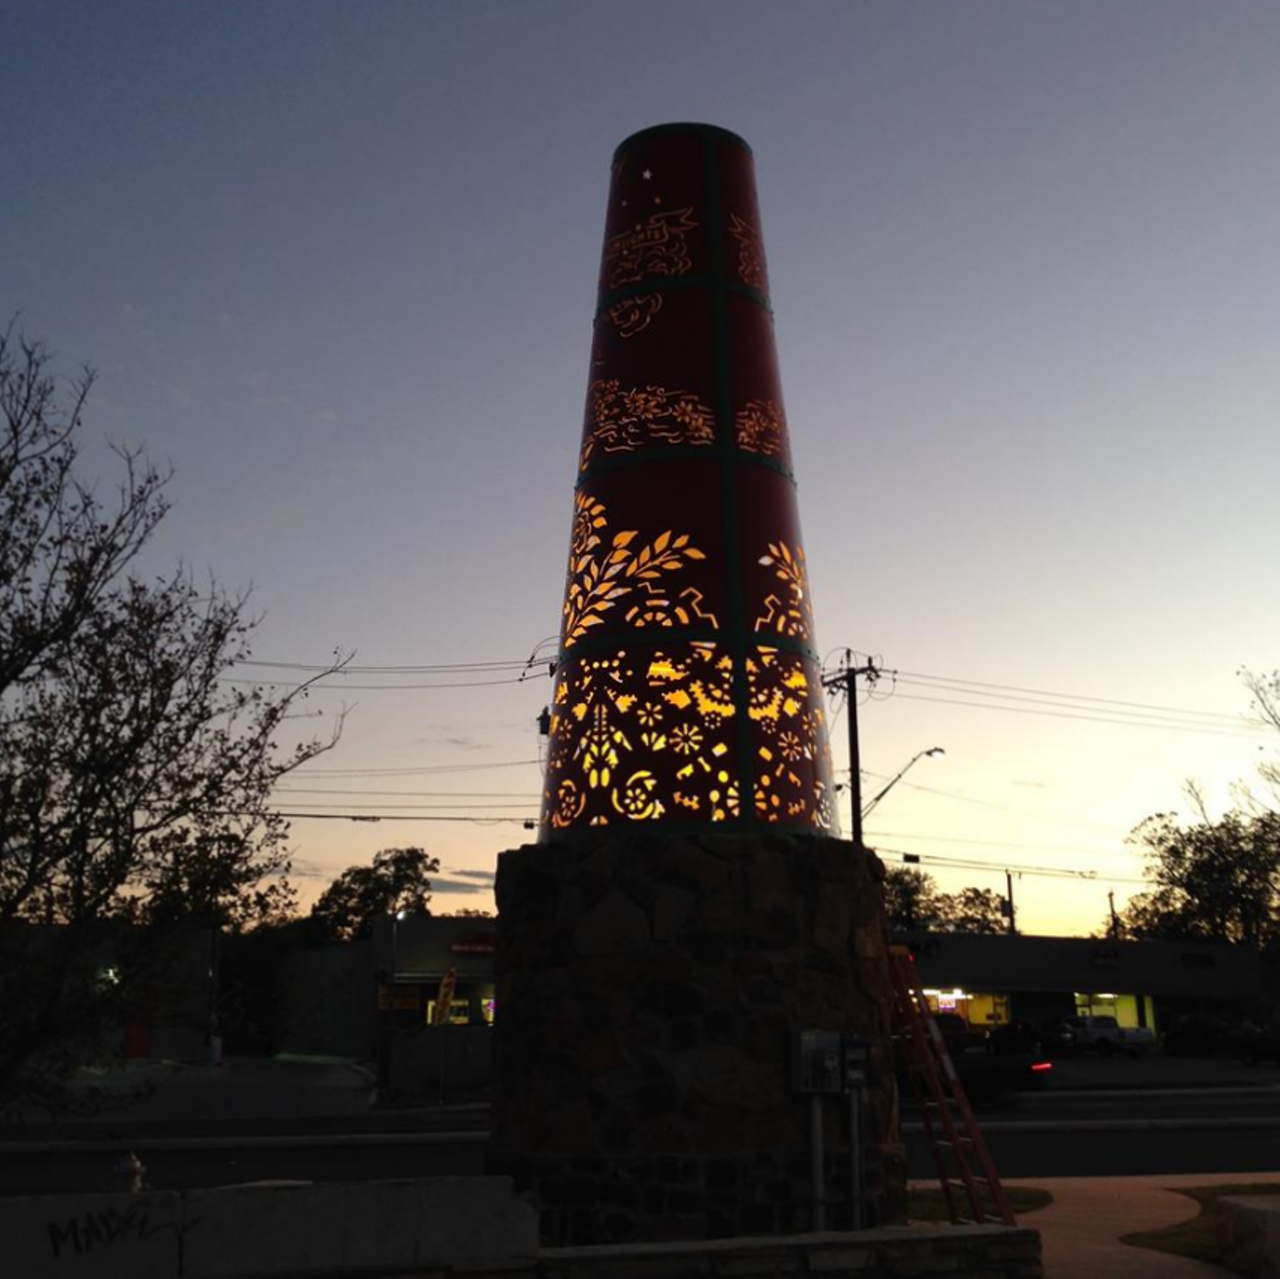 The Beacon
1700 Blanco Road
Artist: Angel Rodriguez-Diaz, 2008
This 28 ft. tall aluminum sculpture lights up at night similar to a luminaria, serving as a beacon at the intersection of Blanco Road and Fulton Street in the Beacon Hill neighborhood.
Facebook/Public Art San Antonio